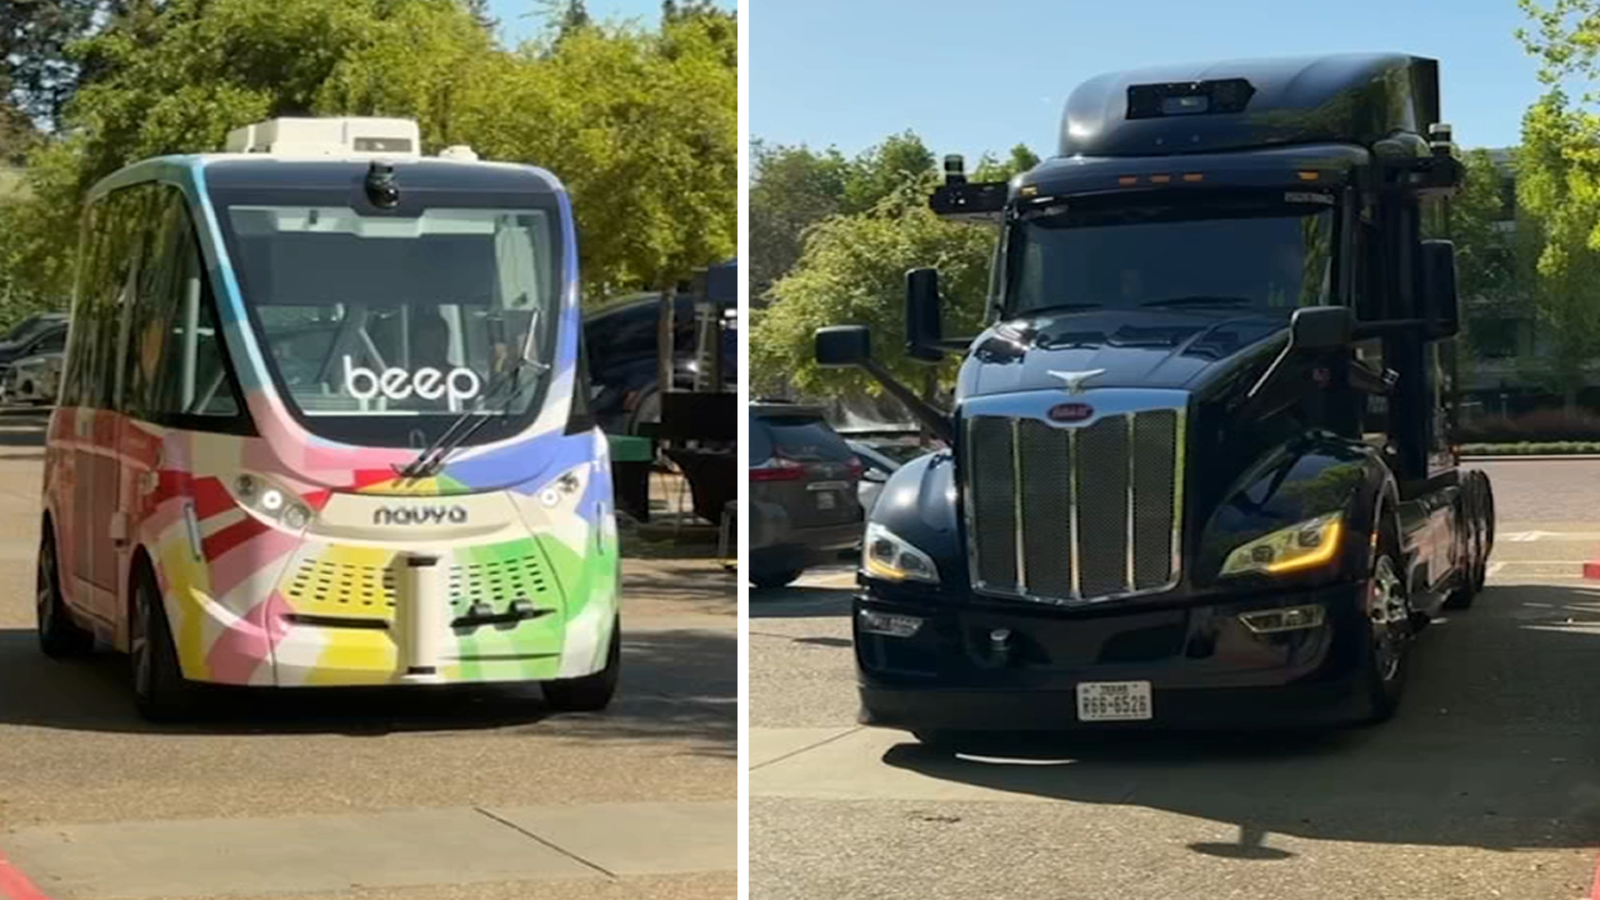 A Beep vehicle and freight truck were just some of the autonomous vehicles showcased at the Redefining Mobility Summit in San Ramon on Tuesday. [Video]